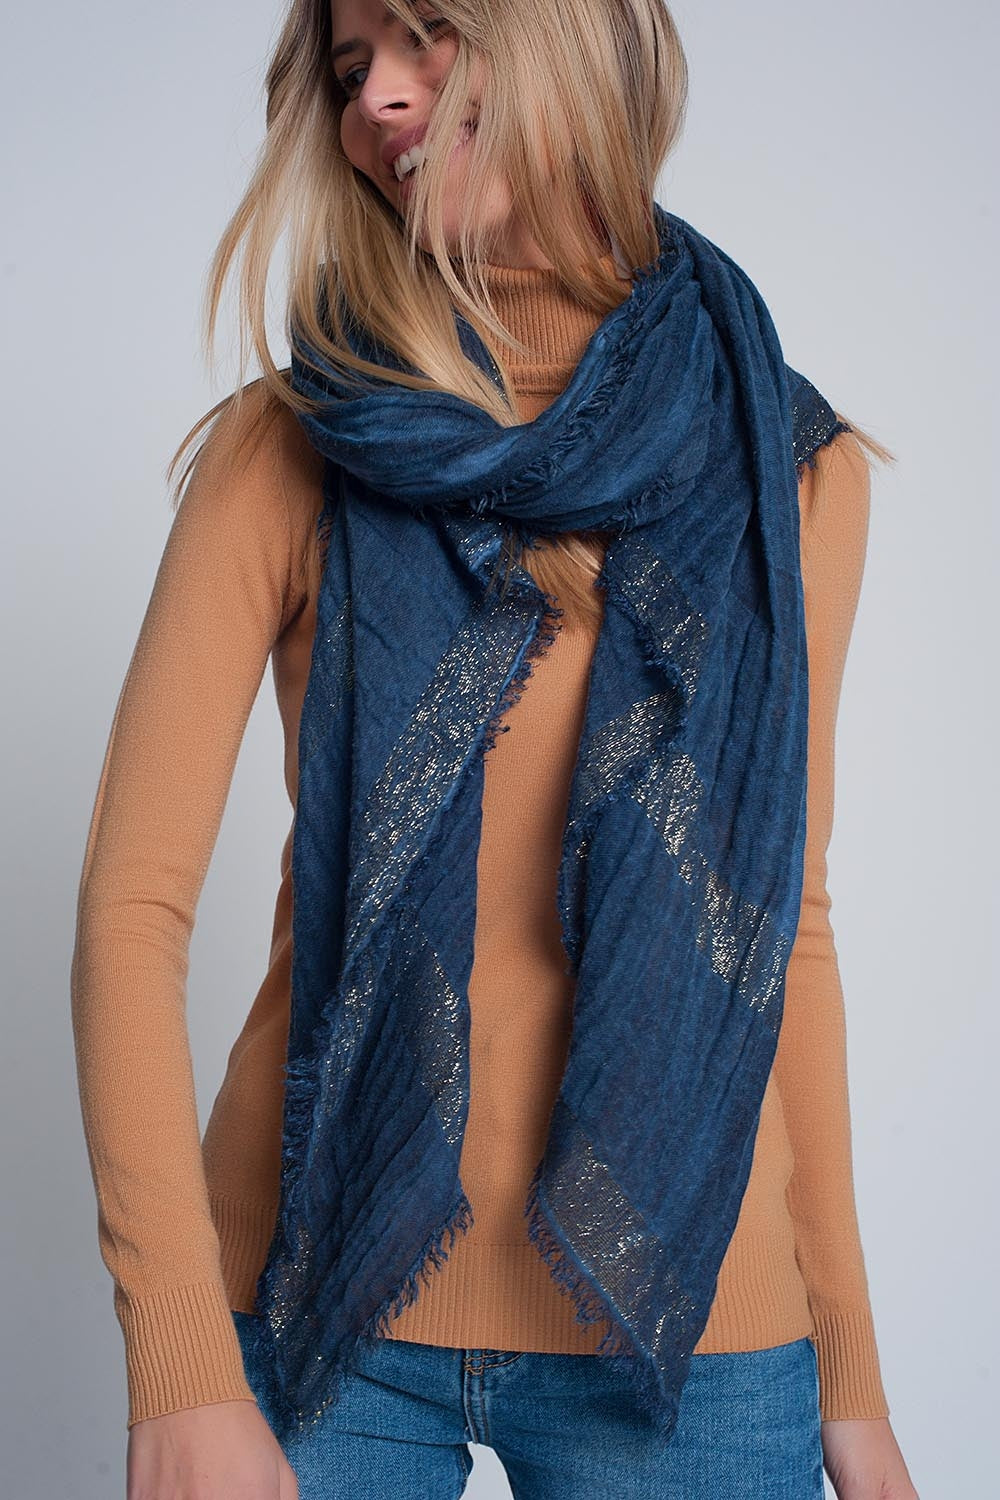 Q2 Lightweight scarf in navy with gold stripes